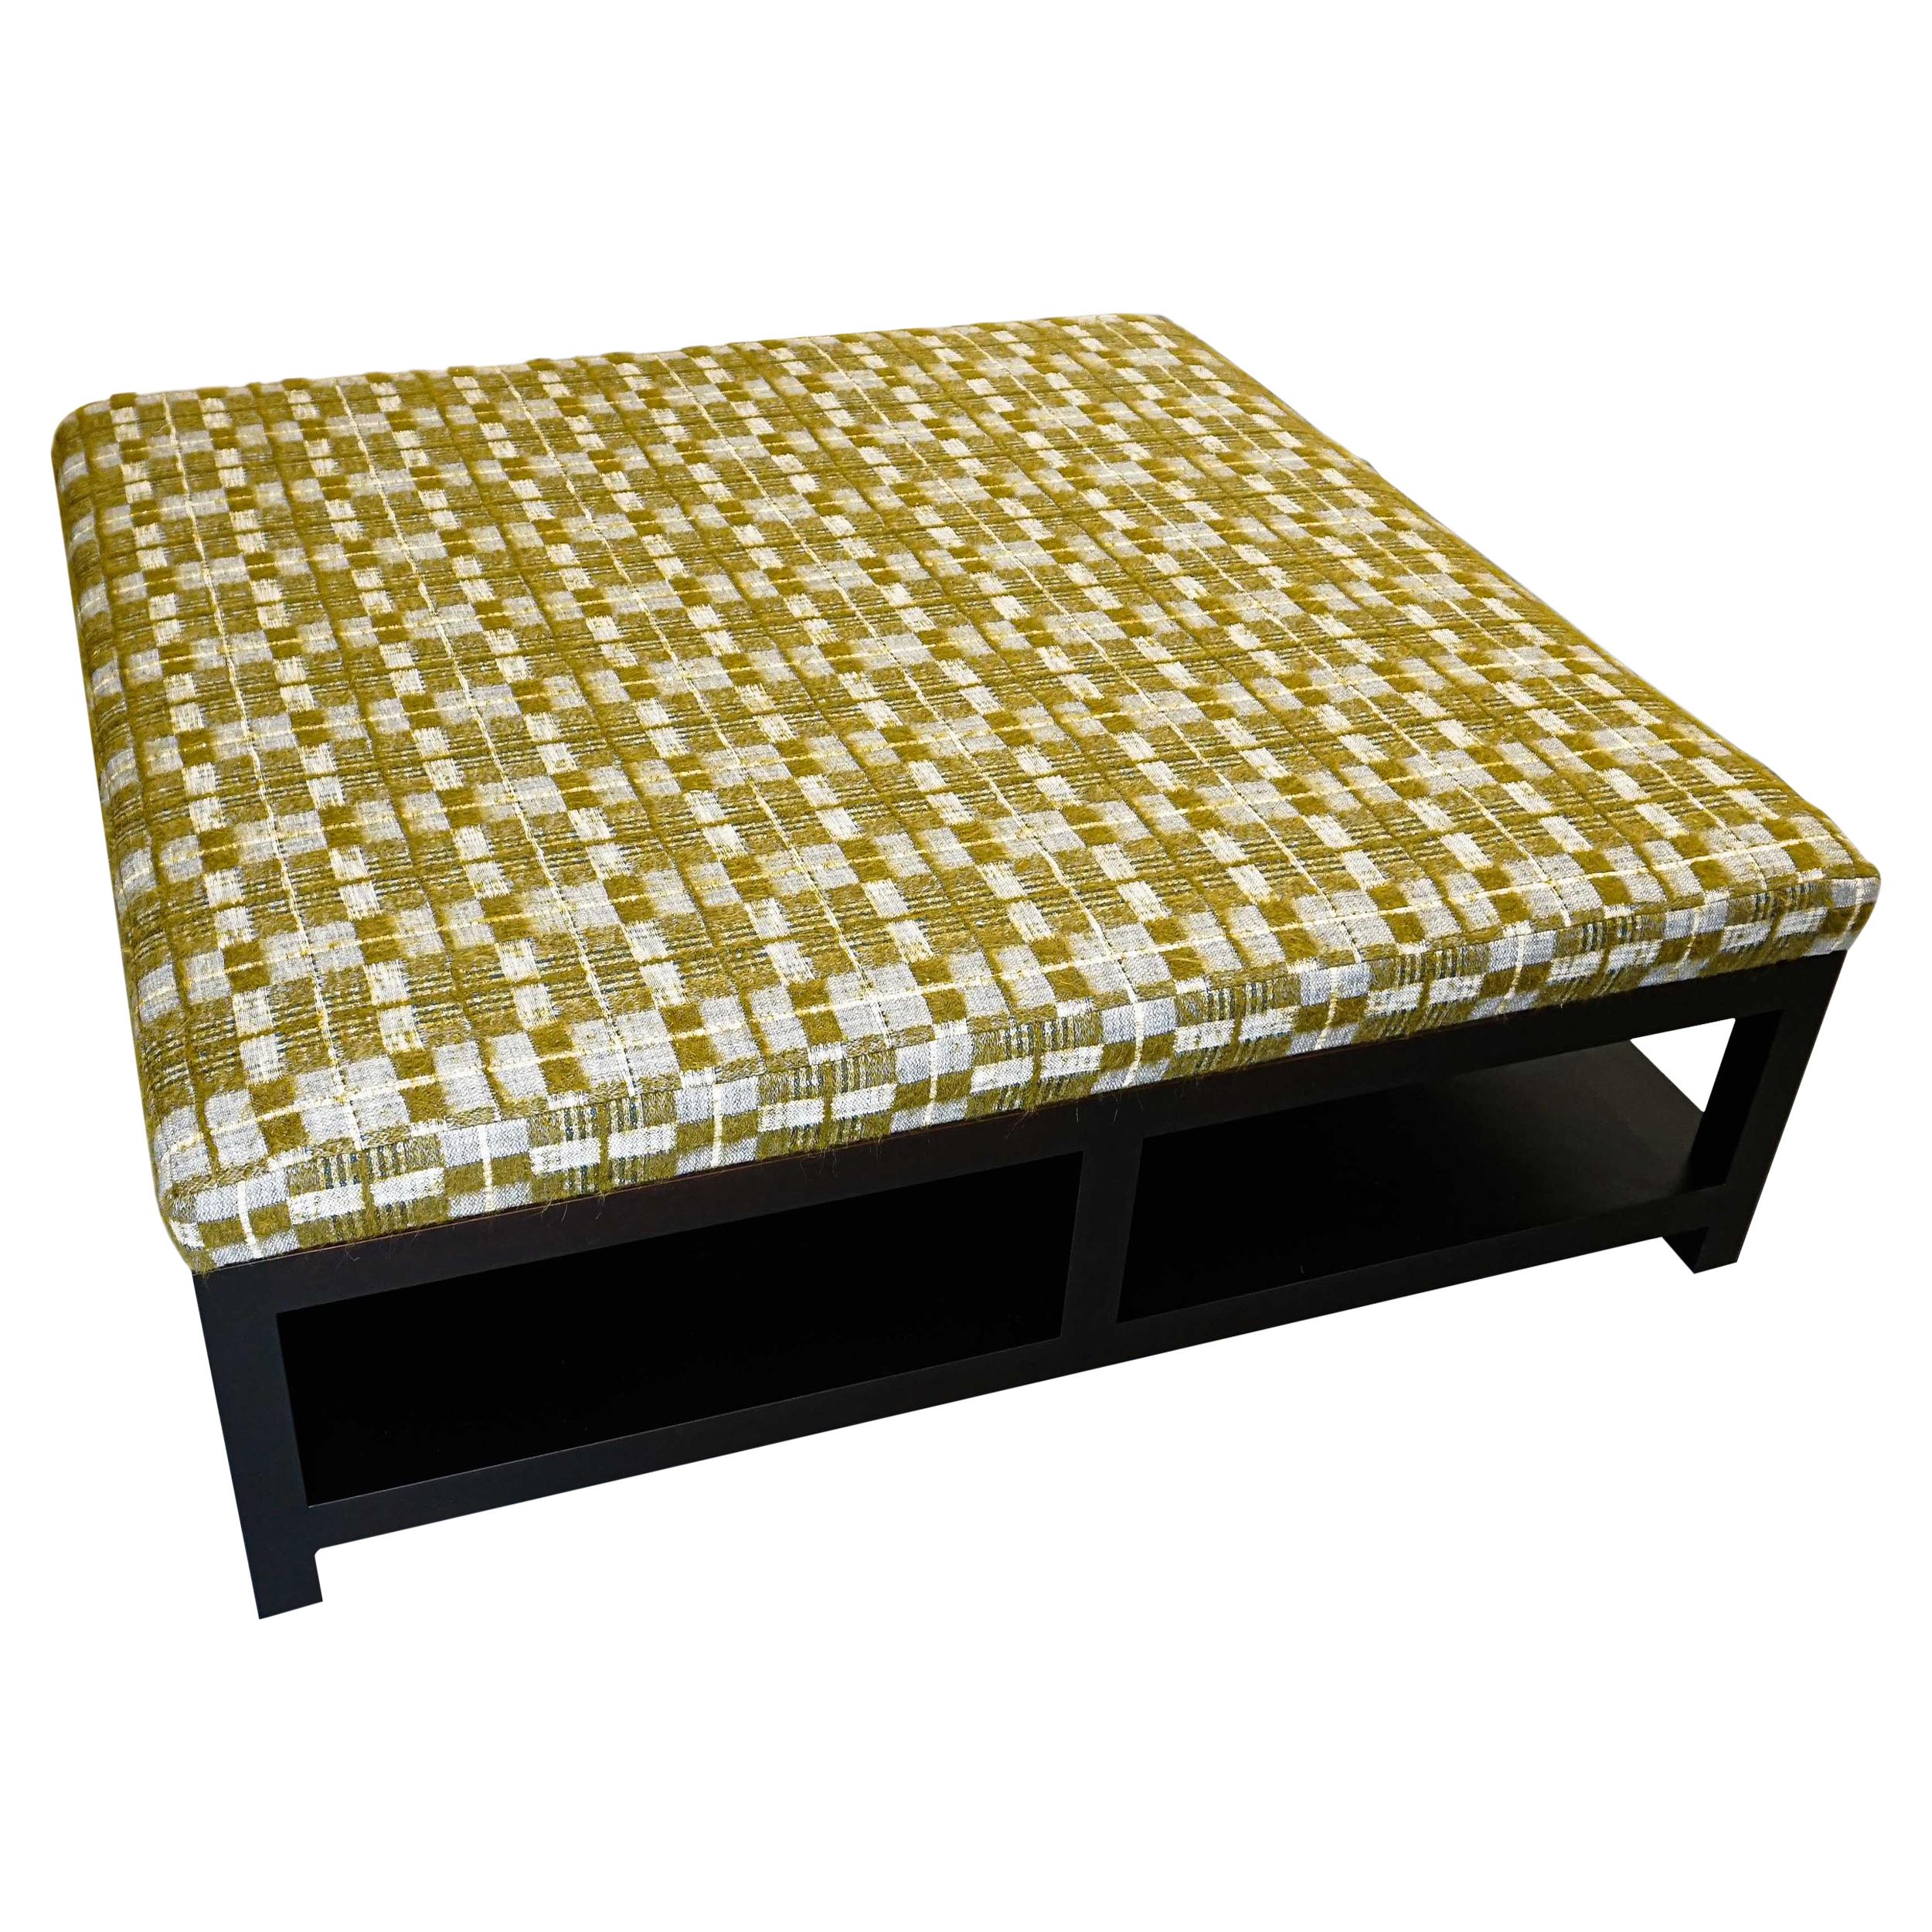 Extra Large Square Ottoman in Check Jacquard Wool Blend For Sale